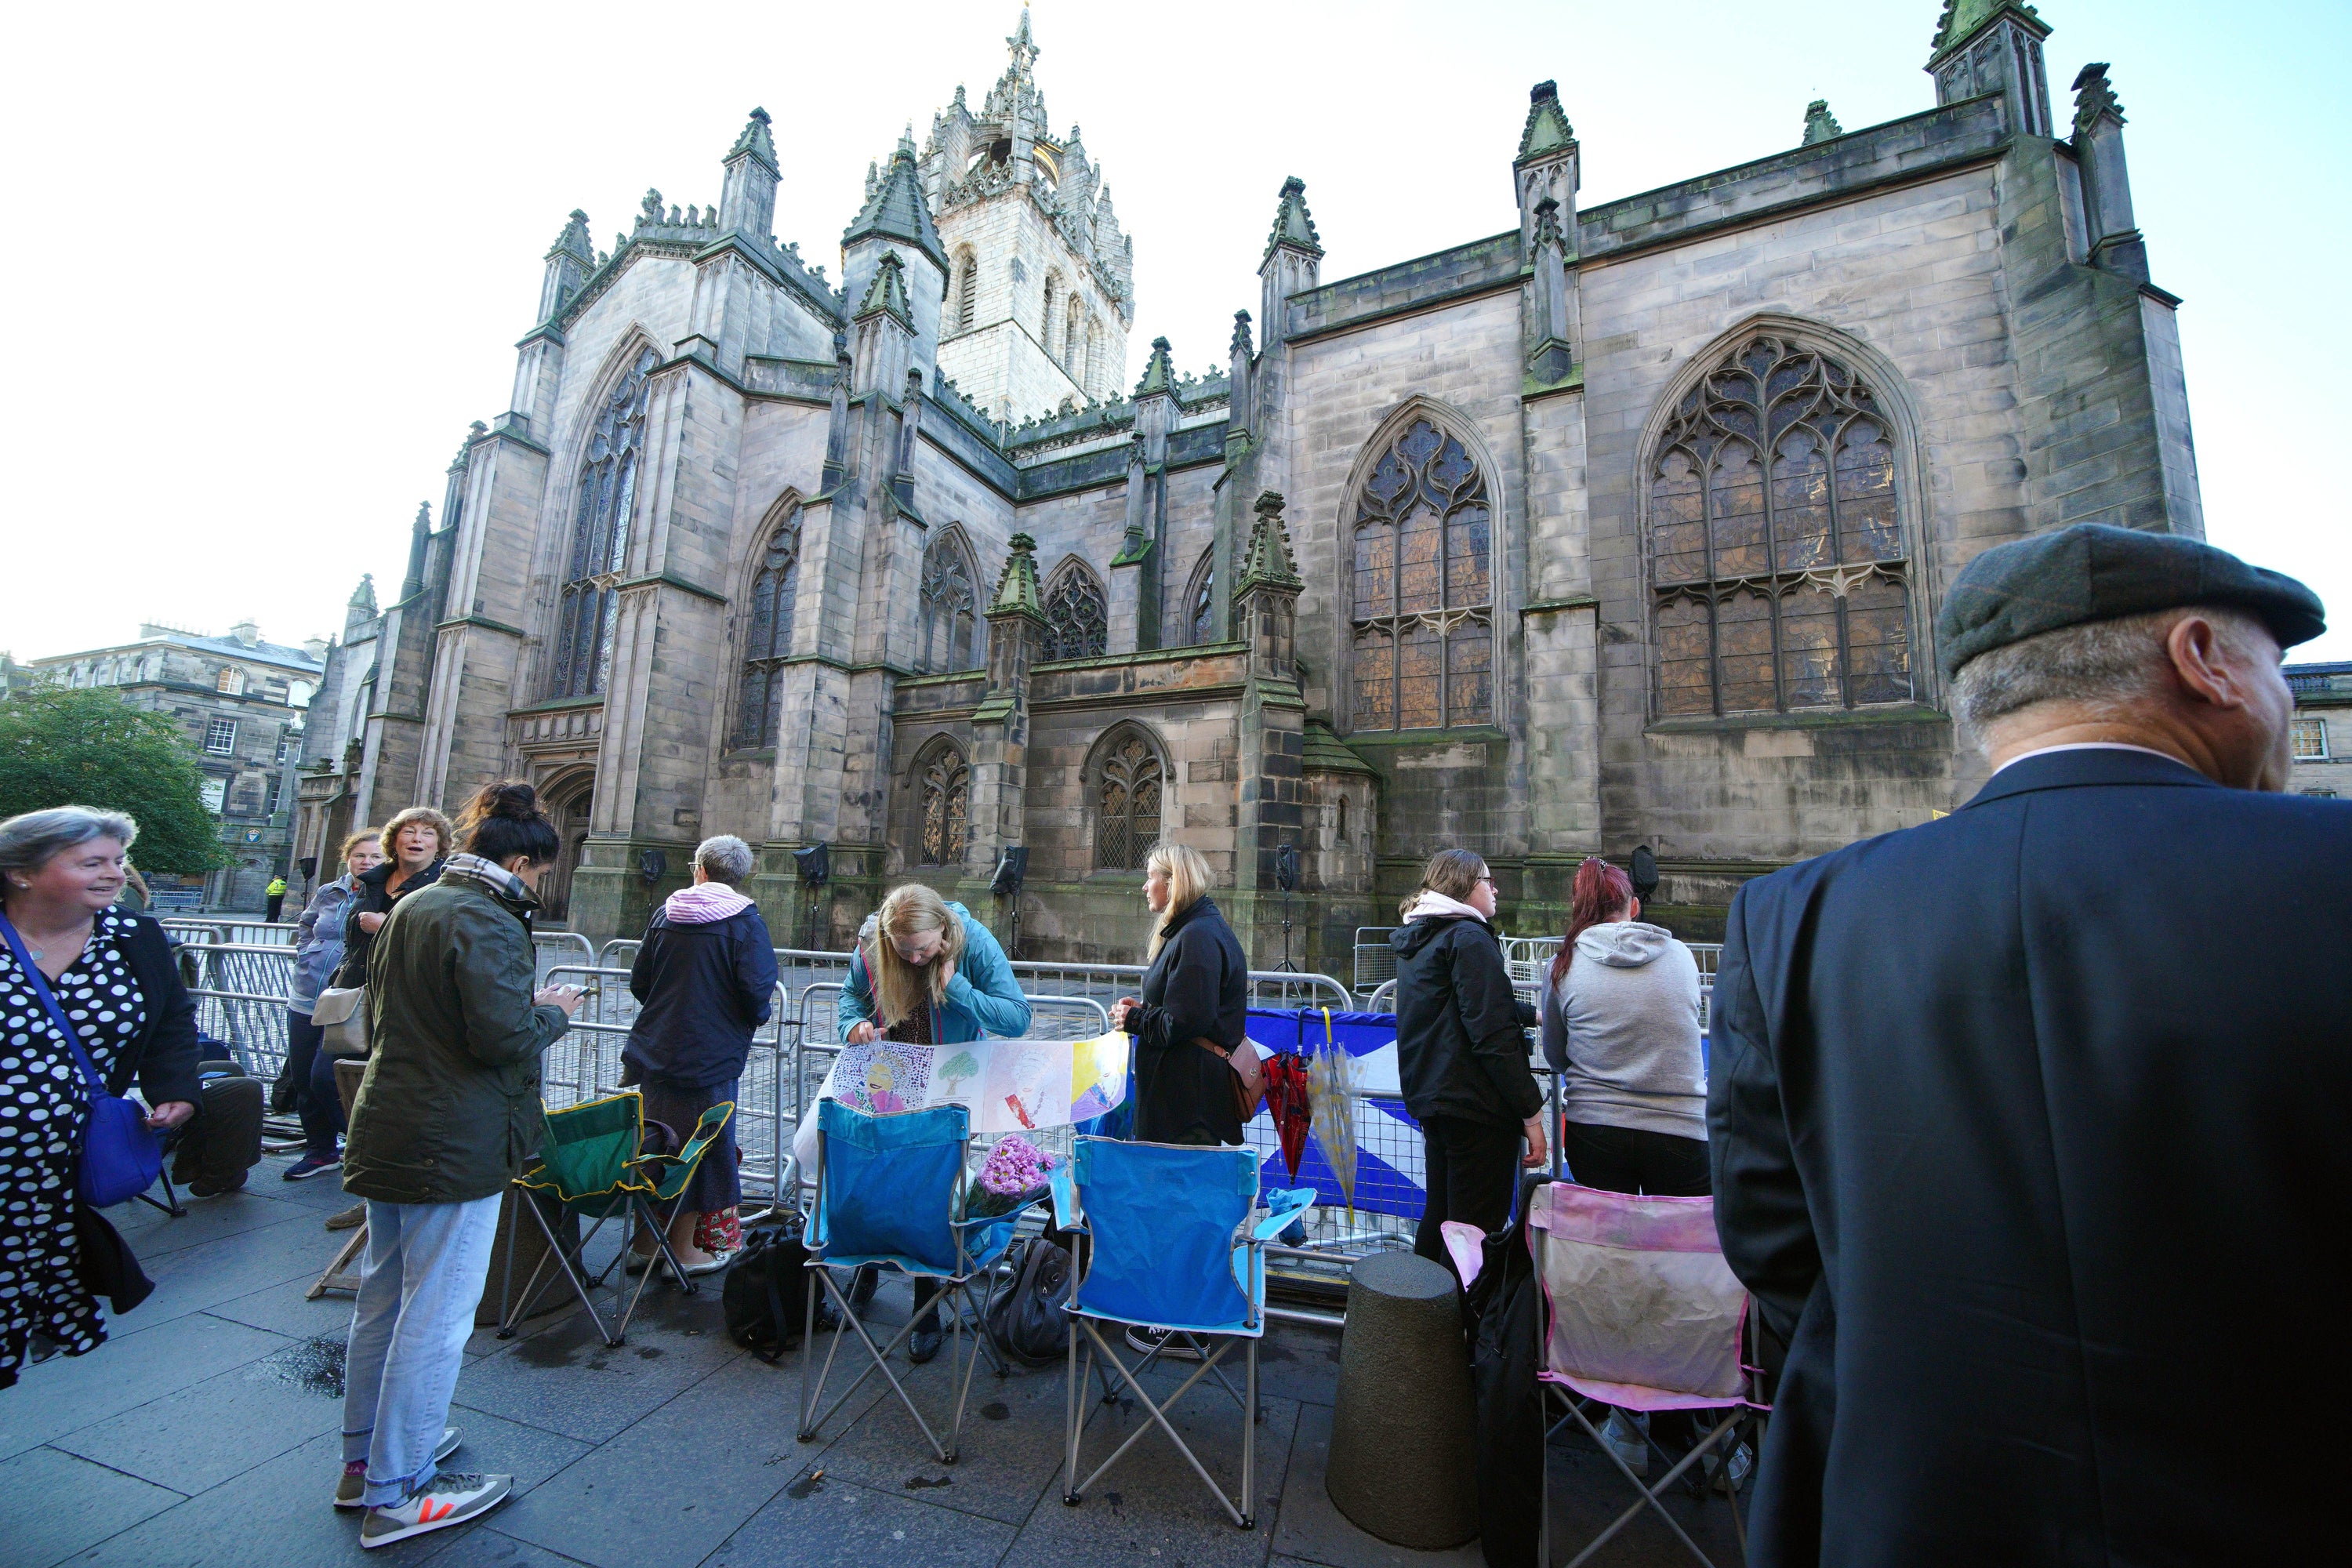 People gathered outside St Giles’ Cathedral in Edinburgh ahead of Monday’s service. (Peter Byrne/PA)